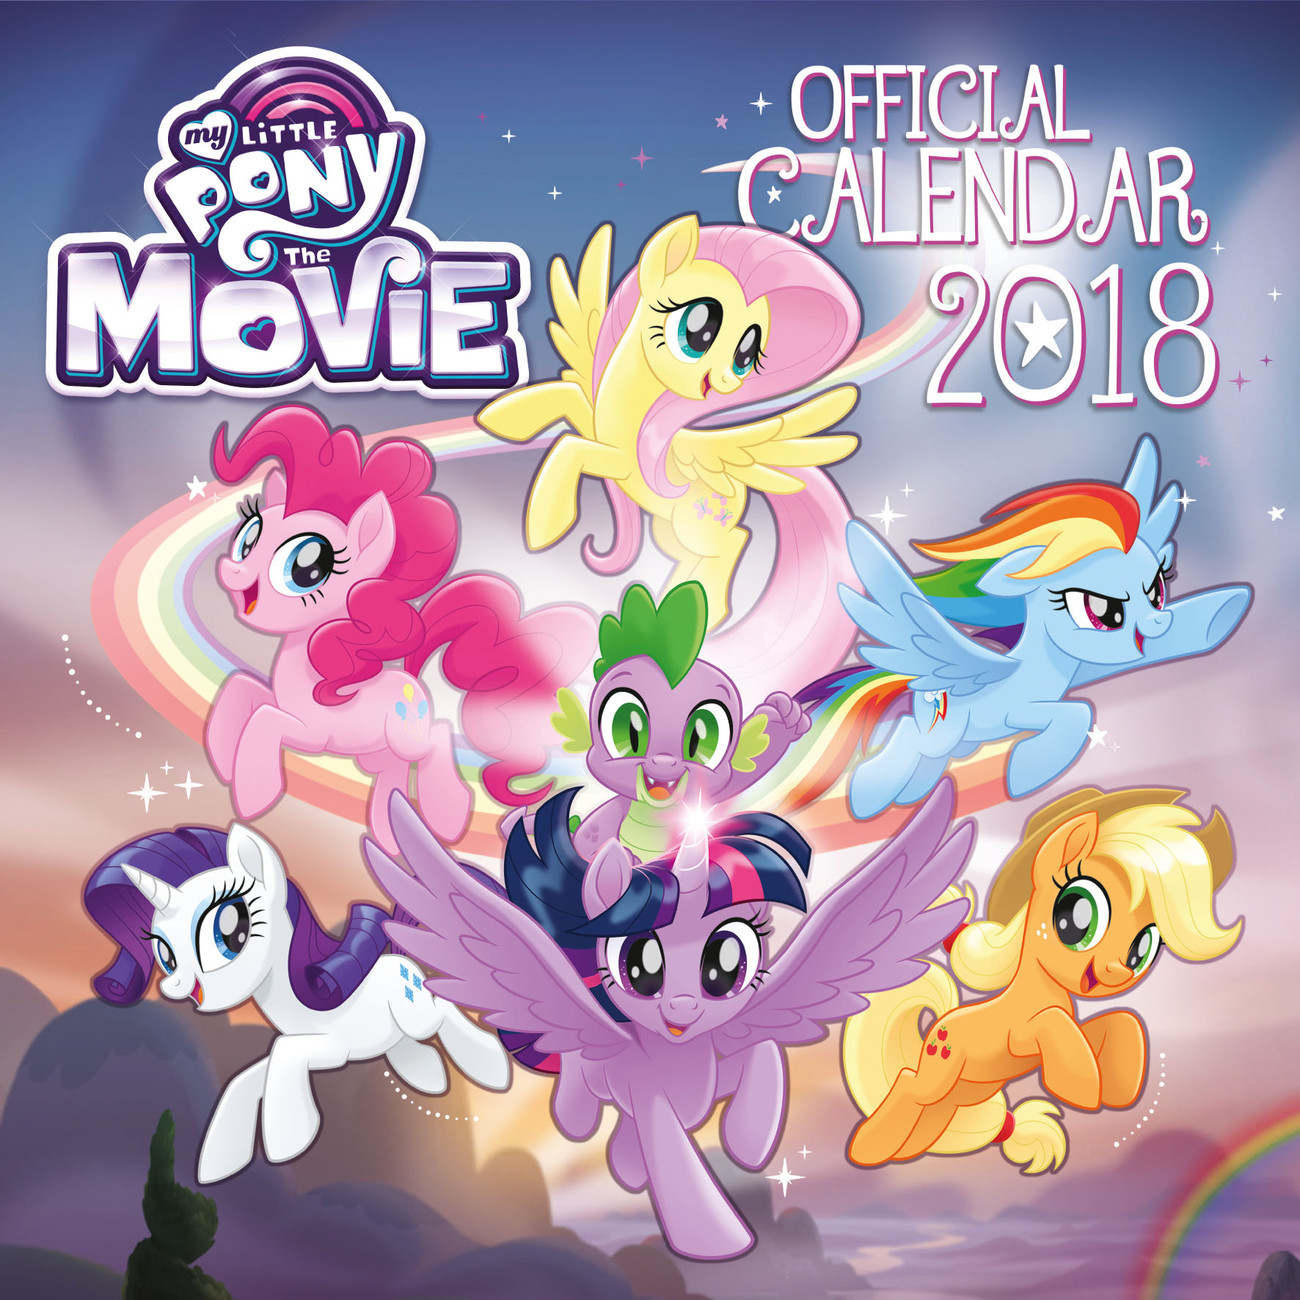 My Little Pony Movie - Calendars 2021 on UKposters/EuroPosters